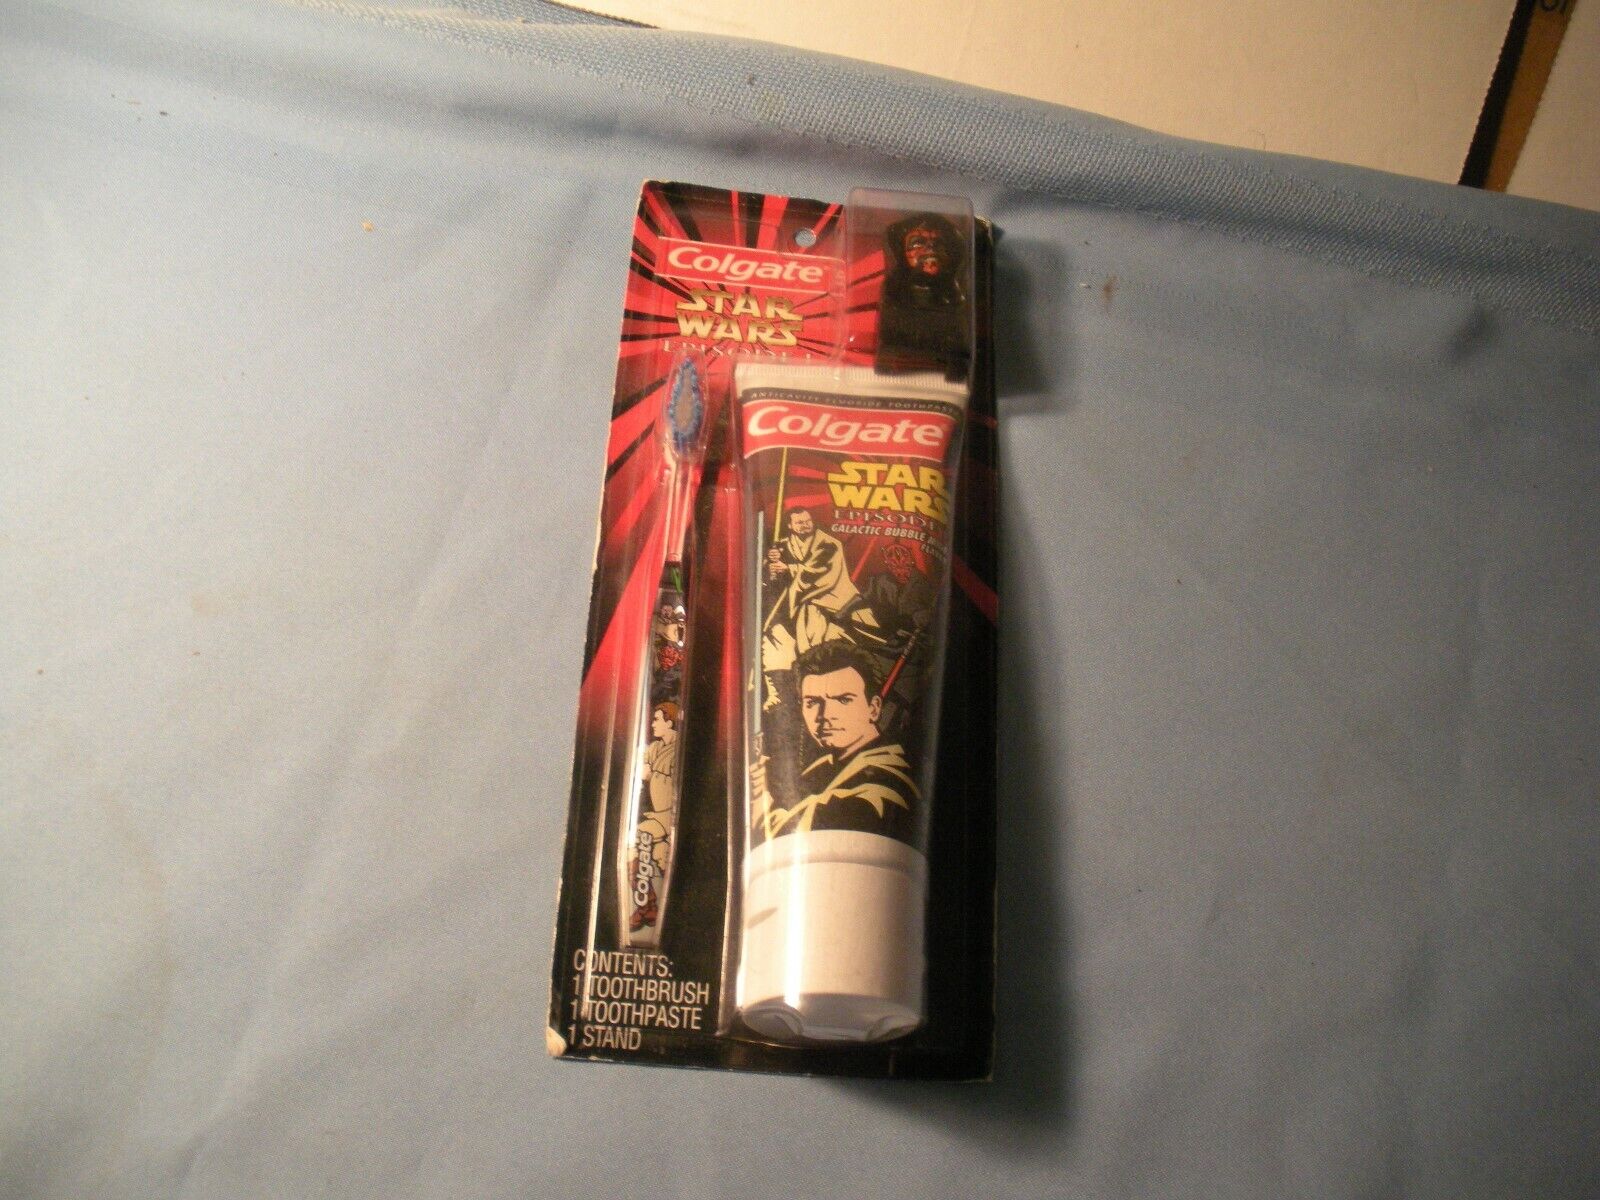 Star Wars Episode I Toothbrush Toothpaste & 1 Stand in Original Package